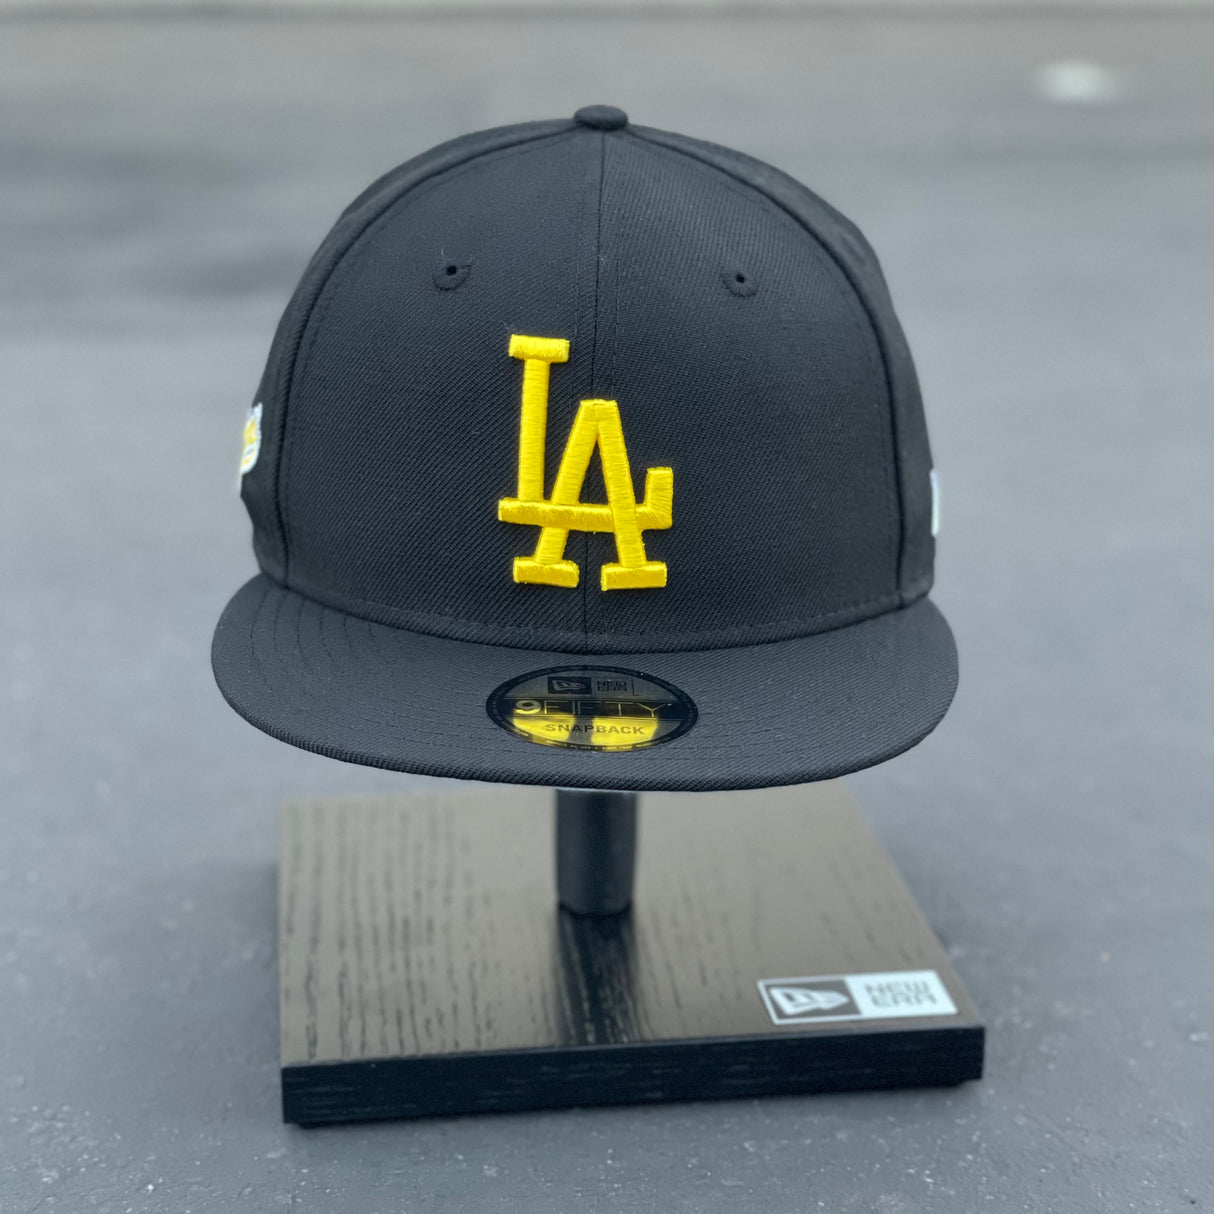 Buy the New Era black and gold cap from Los Angeles Lakers